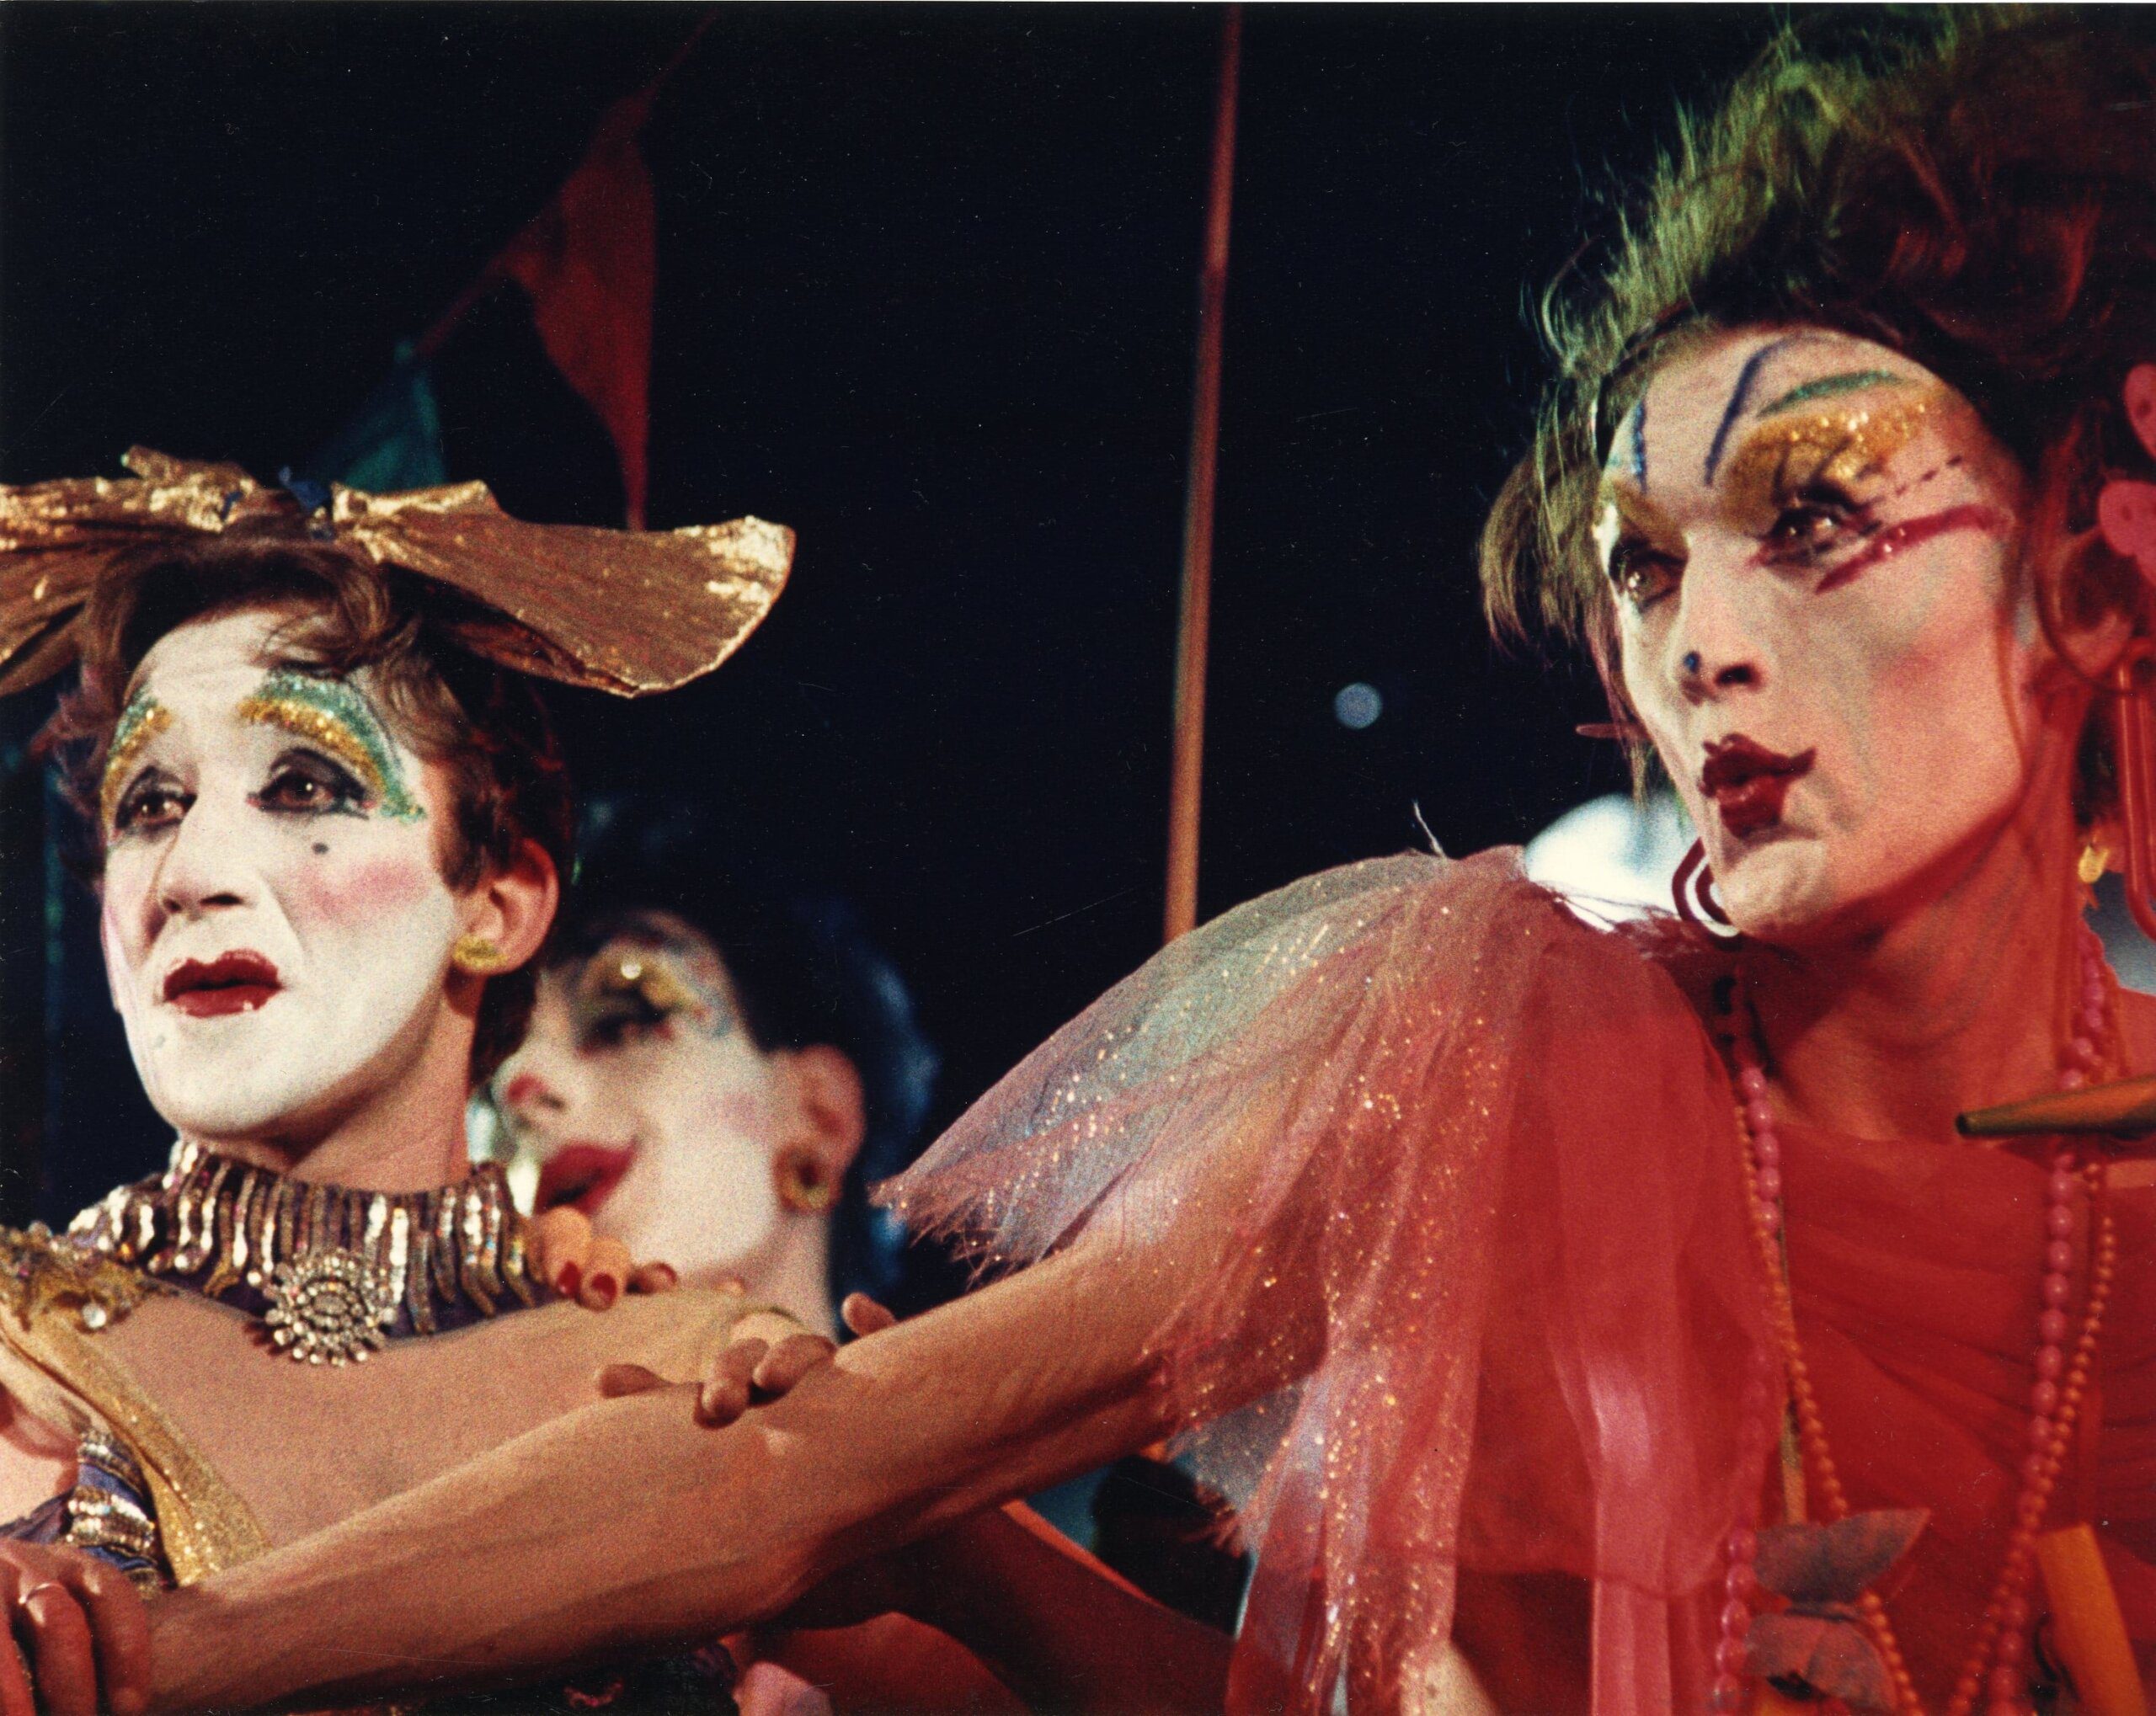 Colour archival image of two queens in glittery make-up; one wears gold lamé, the other a sheer pink shimmery fabric